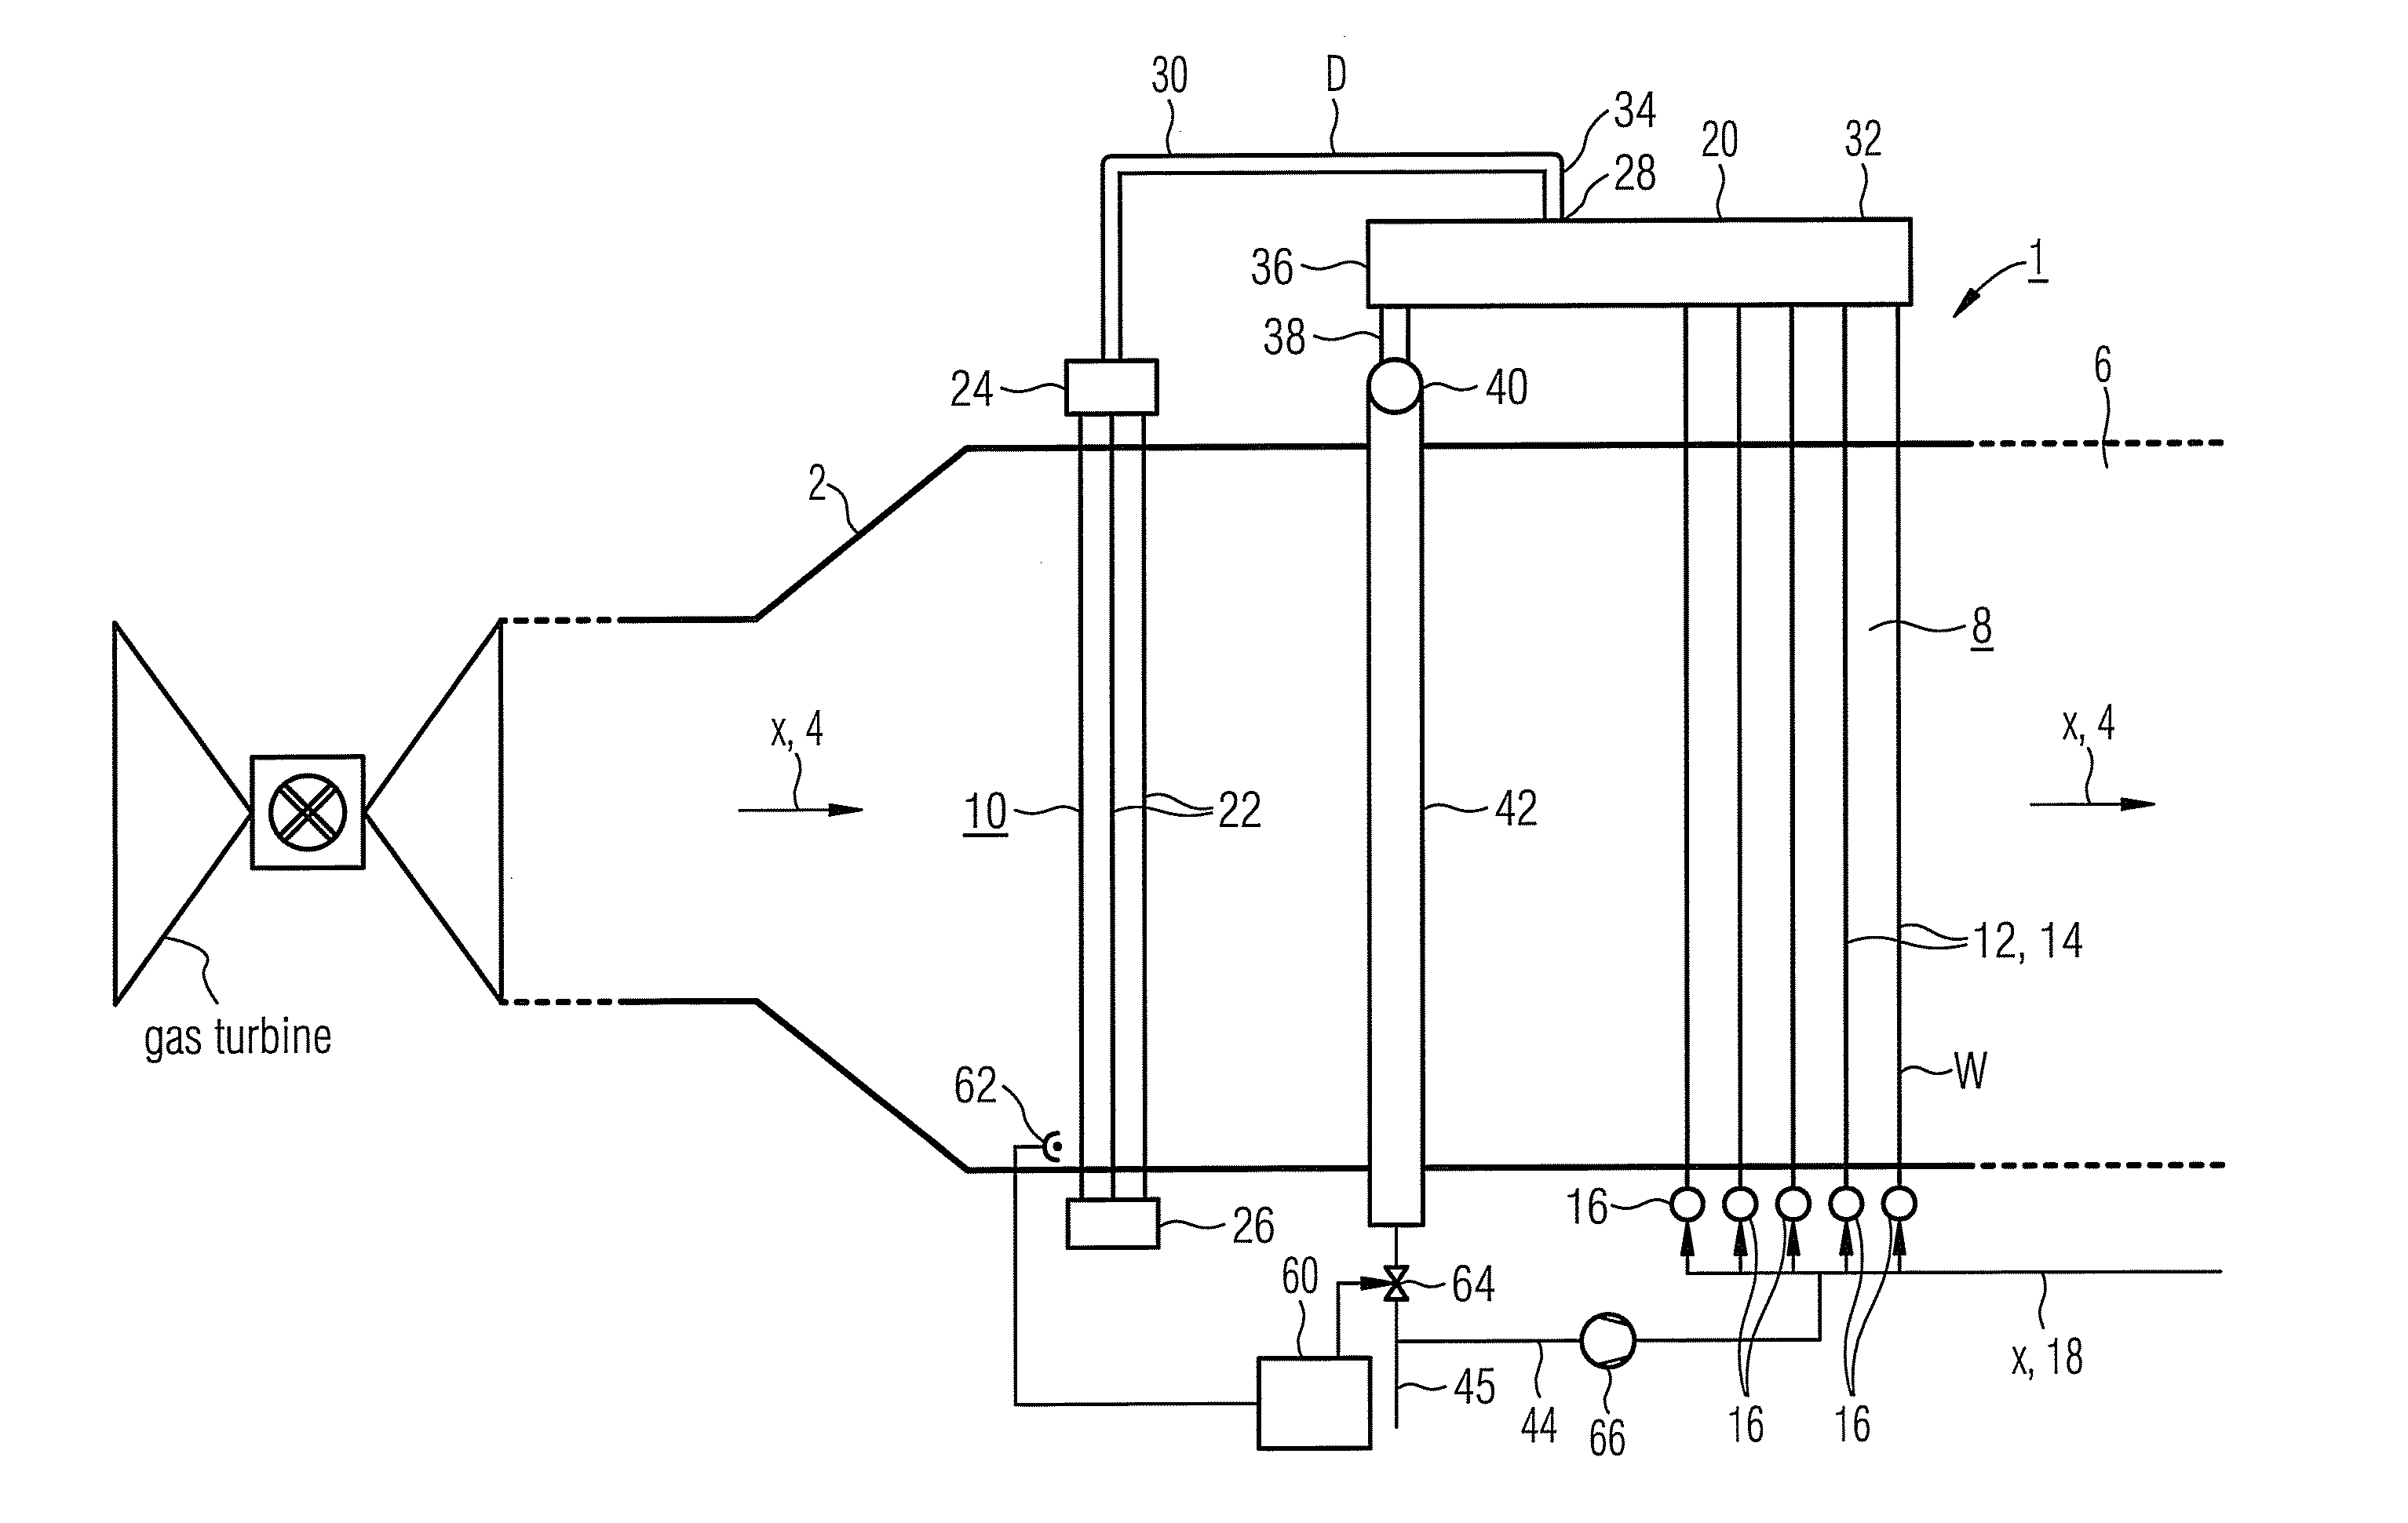 Steam generator in horizontal constructional form